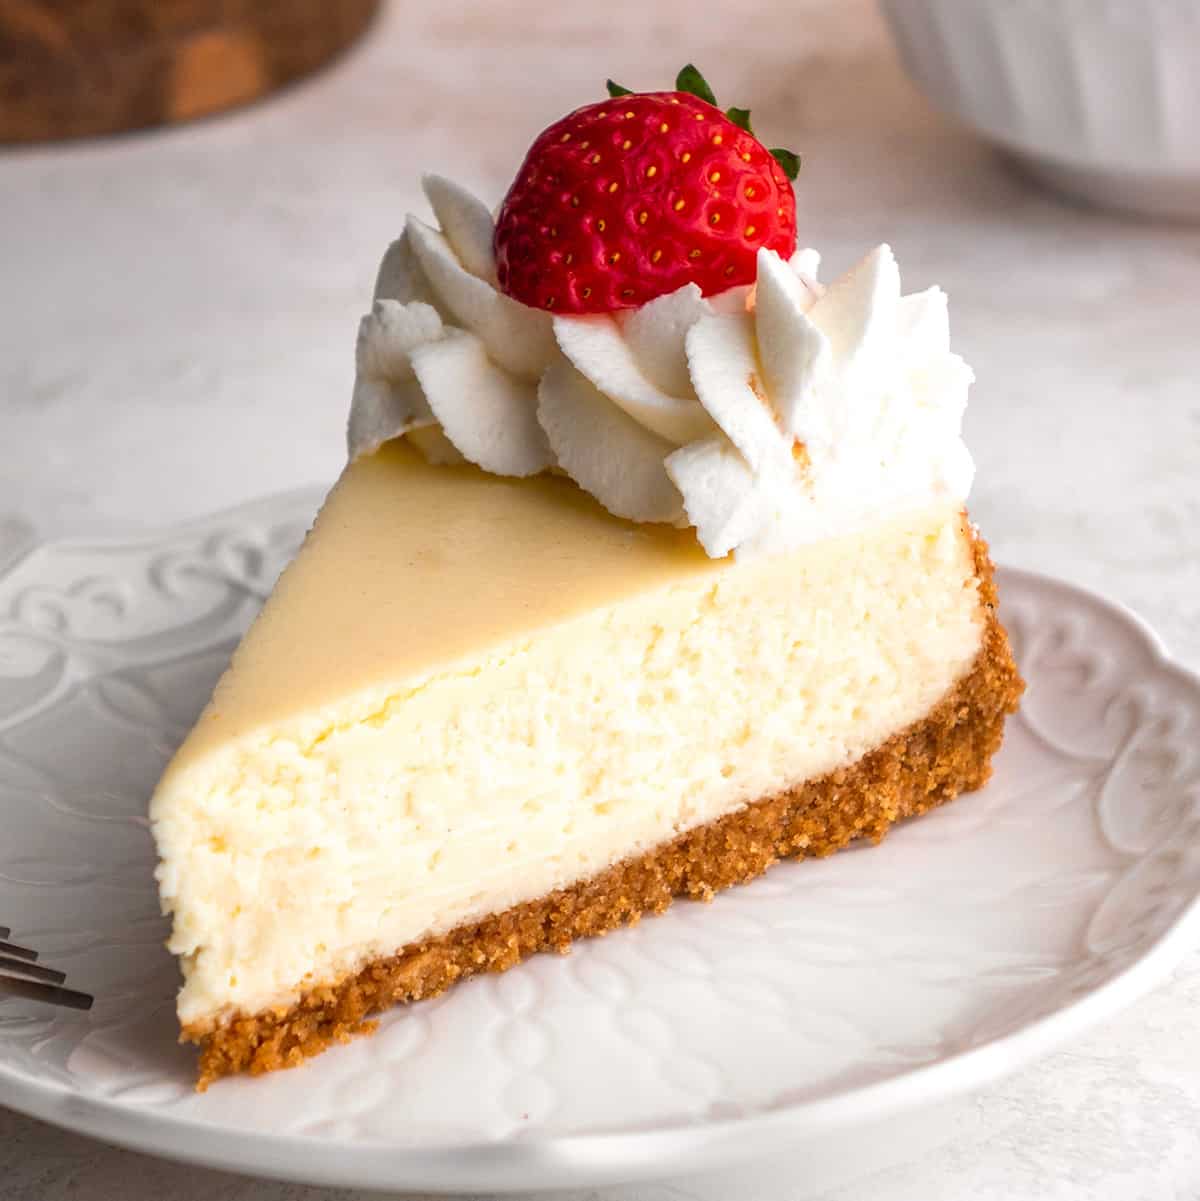 a slice of cheesecake on a plate topped with whipped cream and a strawberry